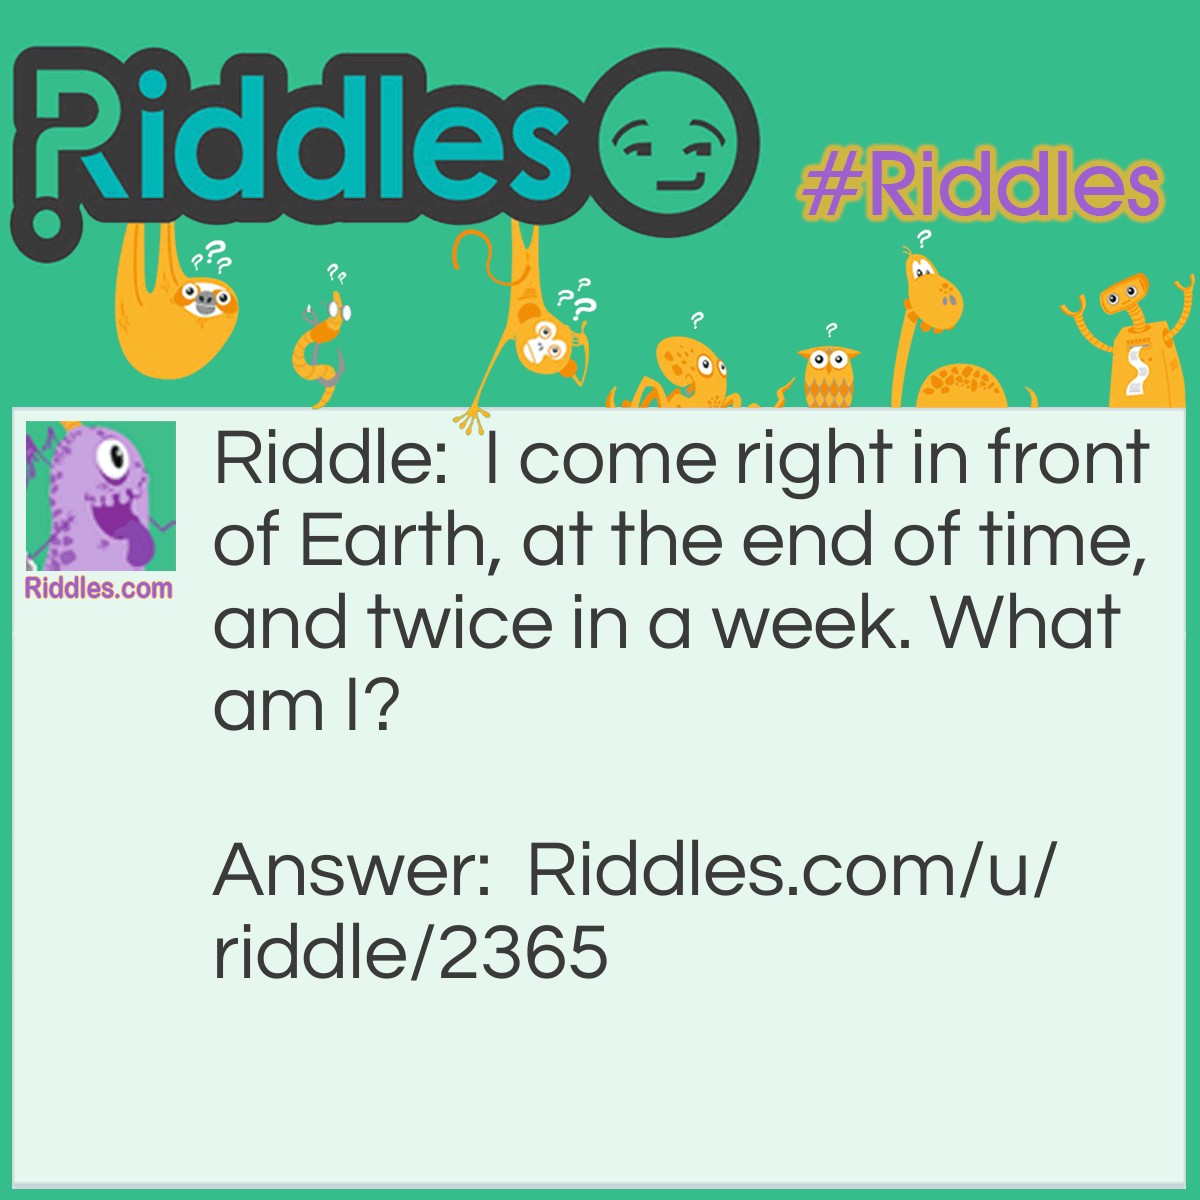 Riddle: I come right in front of Earth, at the end of time, and twice in a week. What am I? Answer: The letter E.